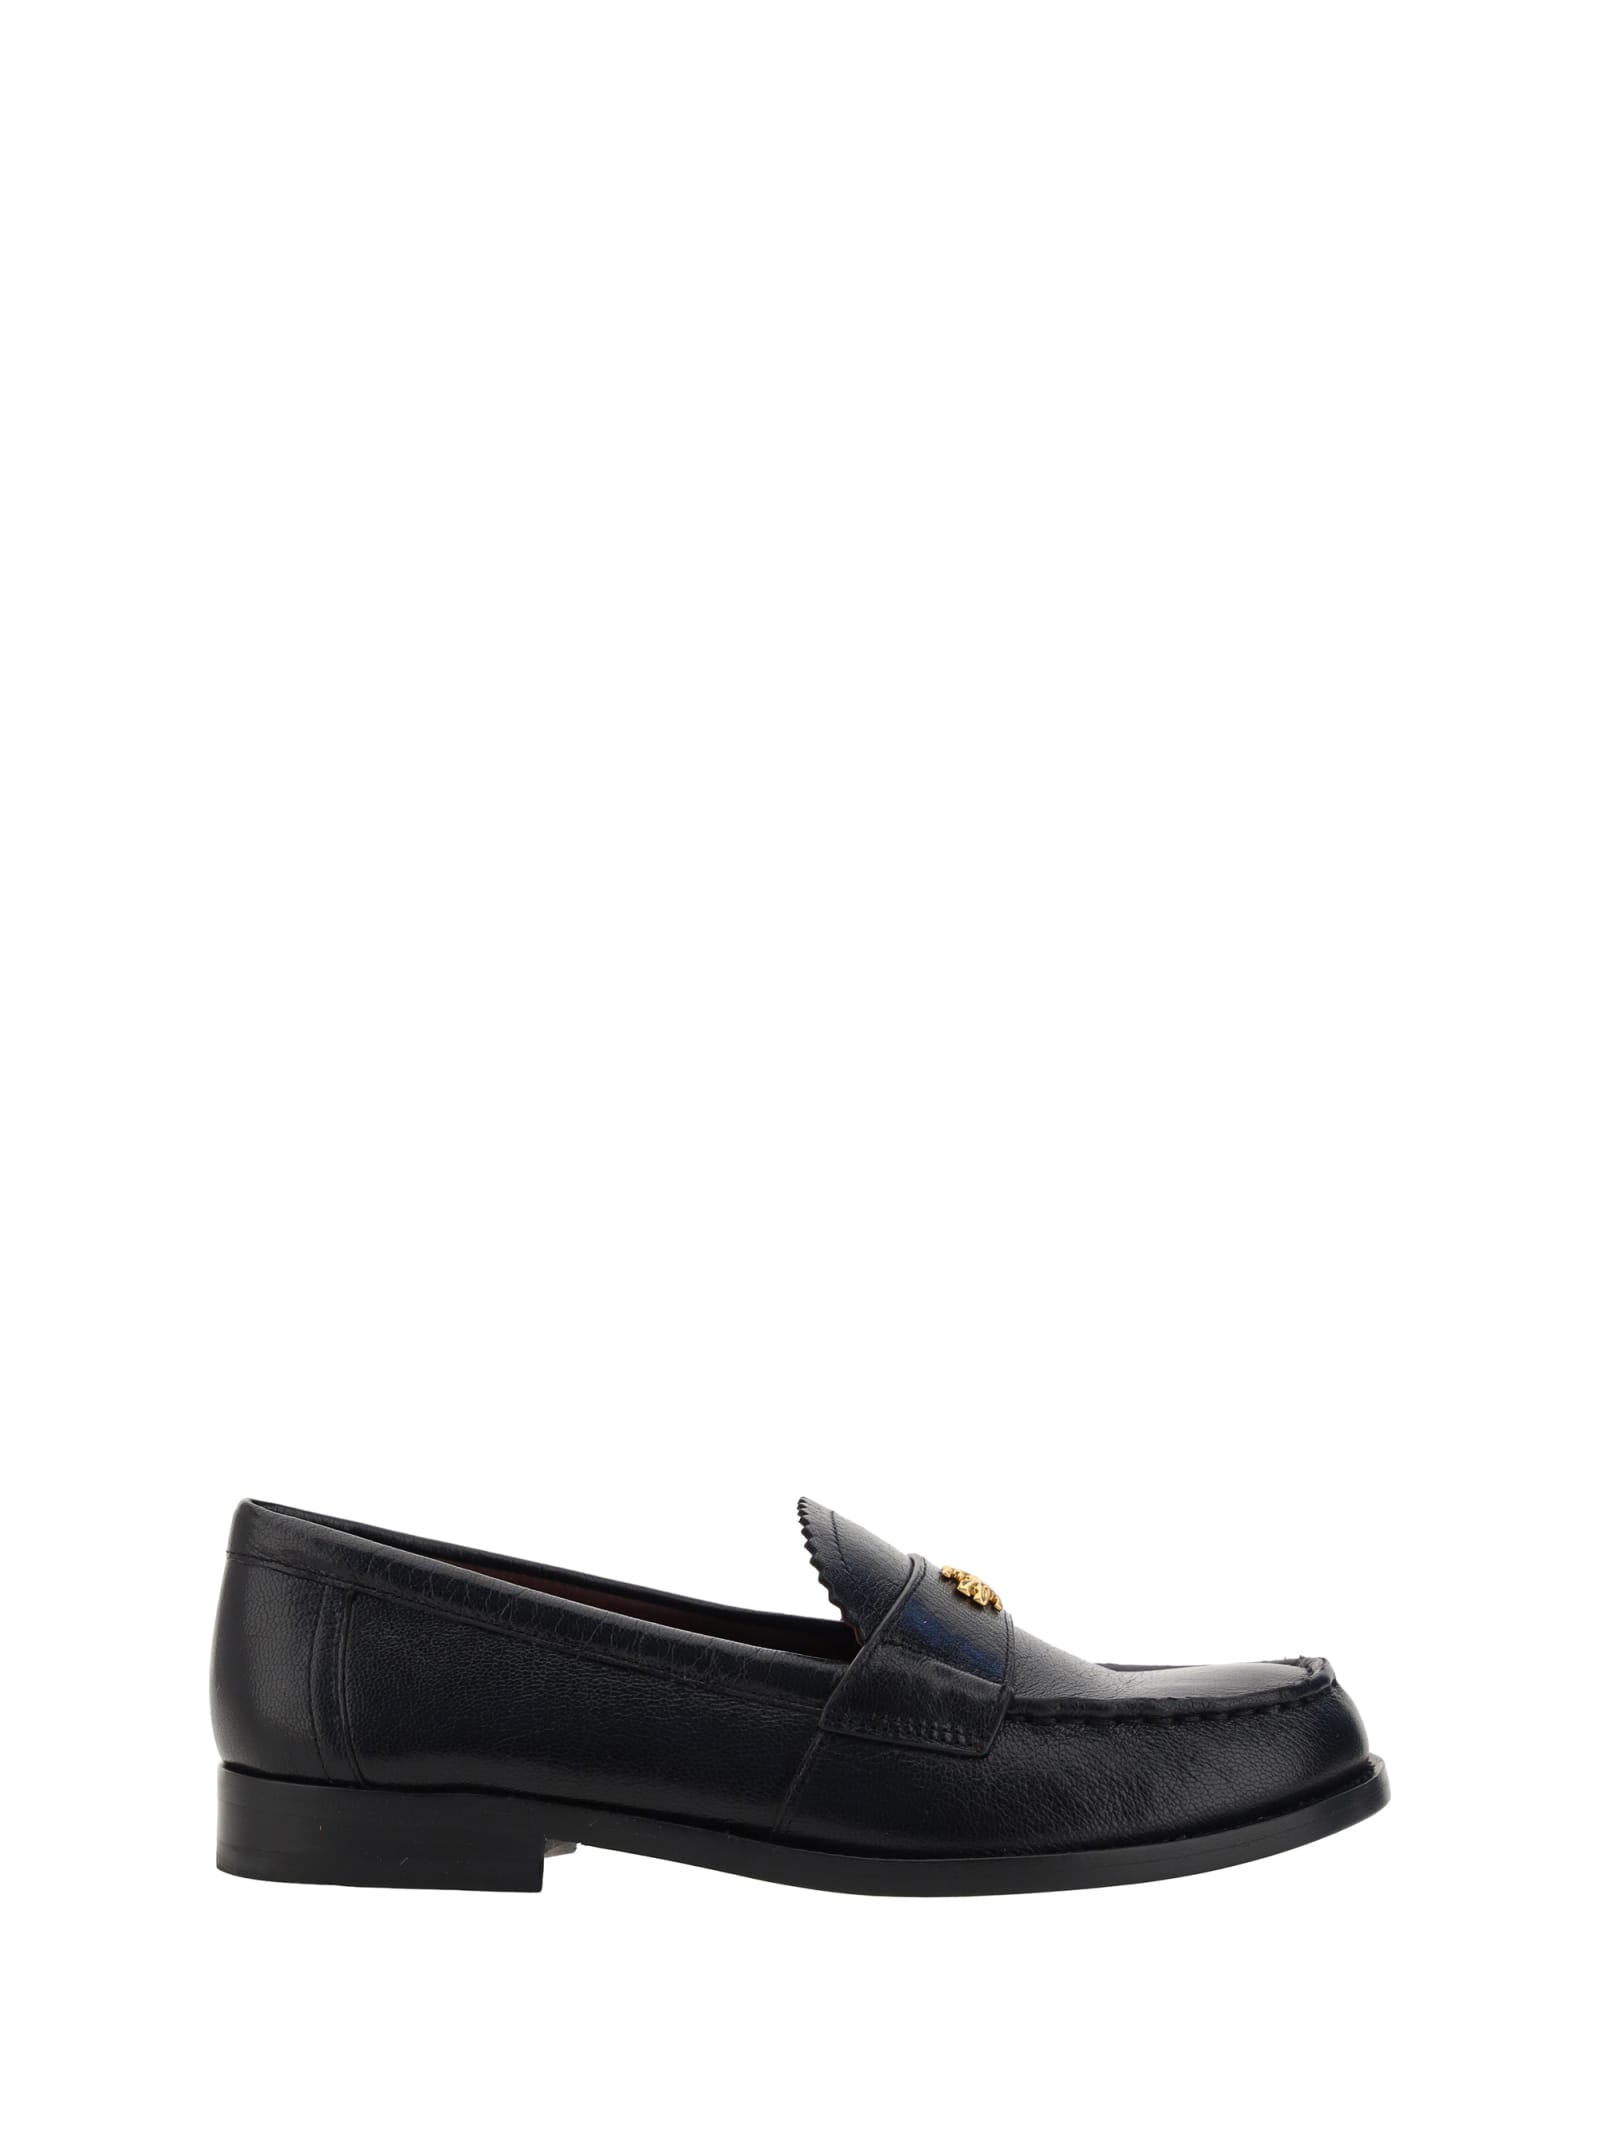 TORY BURCH CLASSIC LOAFERS